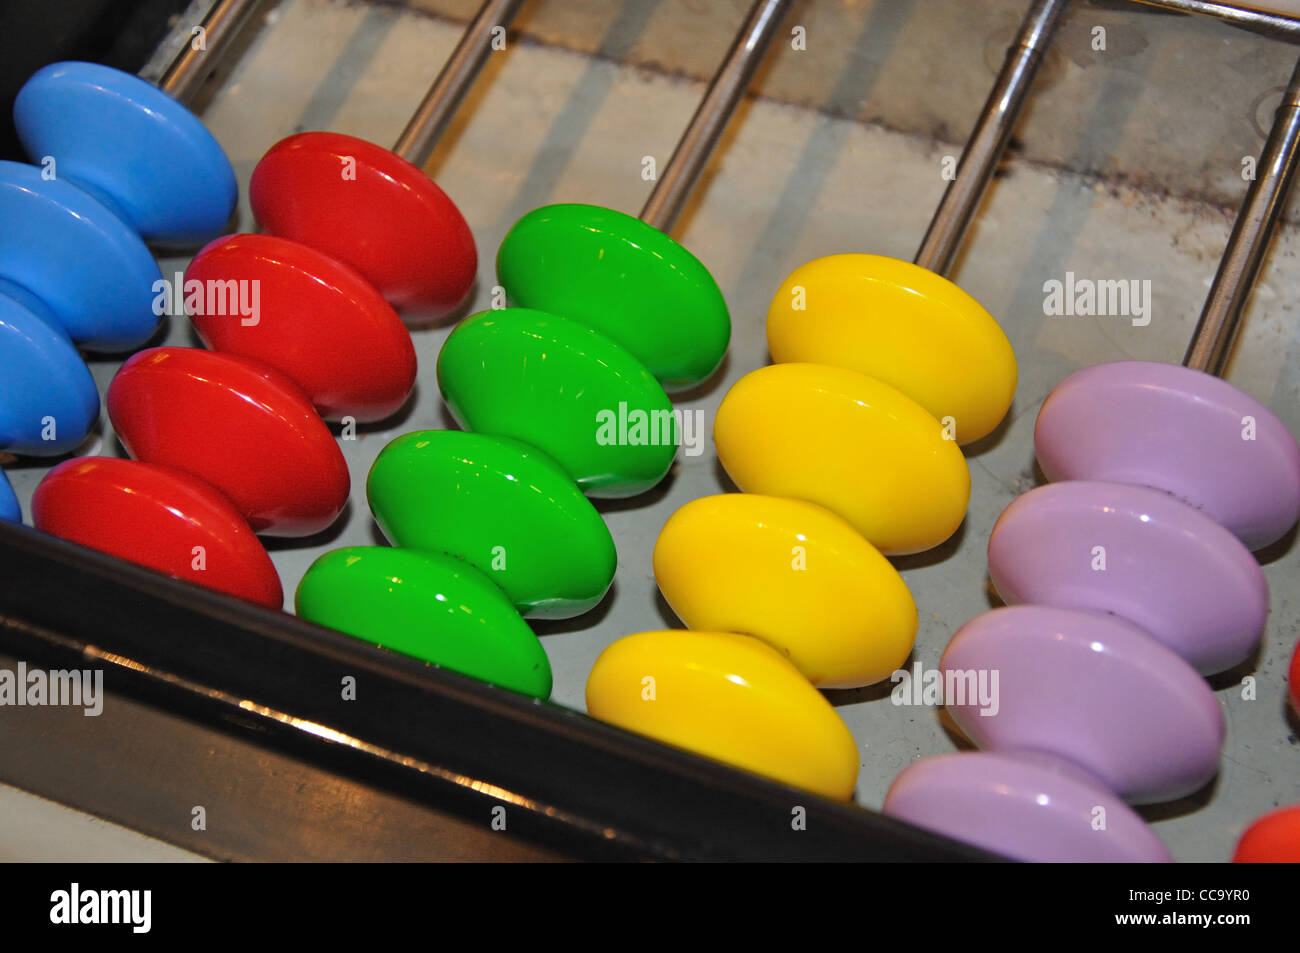 An abacus at The Science Museum, Kensington, Royal Borough of Kensington and Chelsea, London, England, United Kingdom Stock Photo